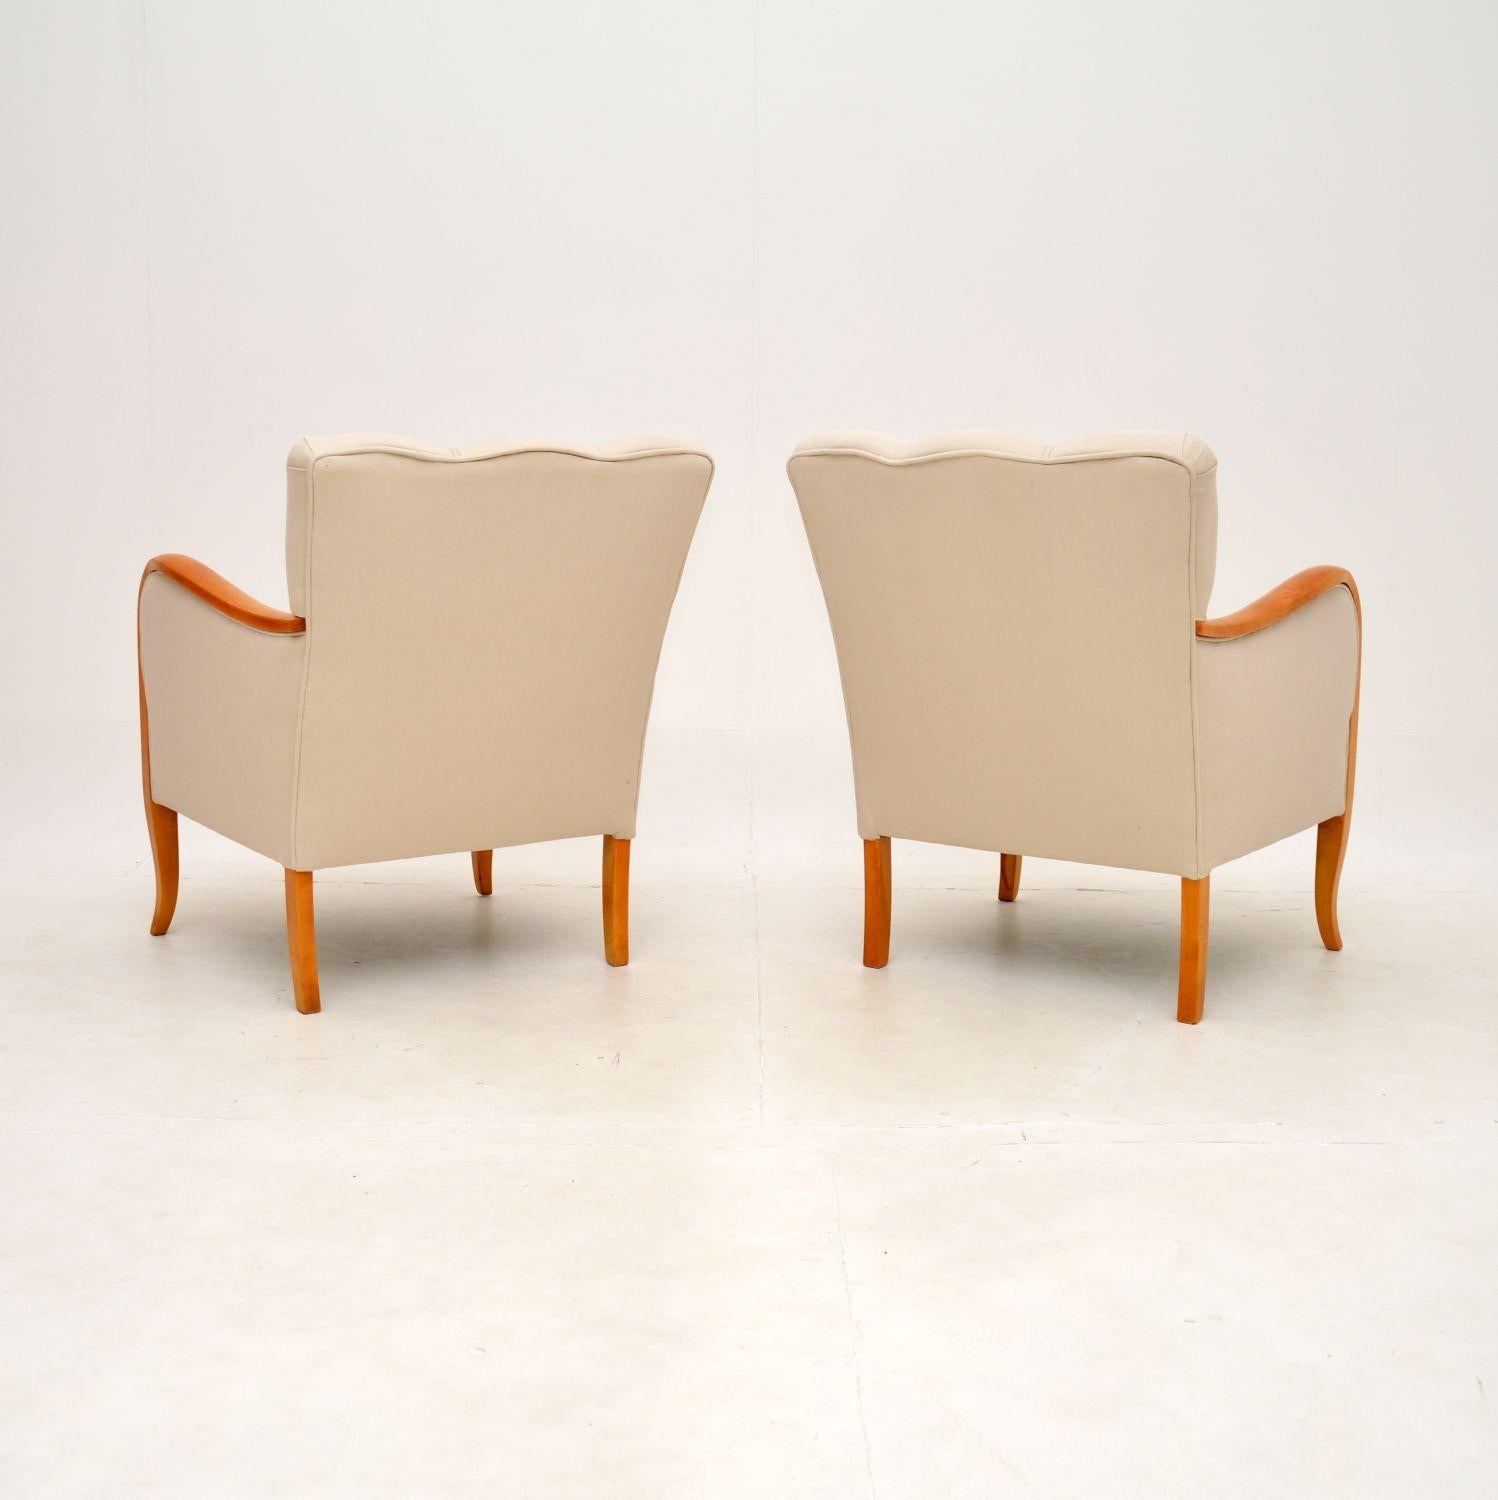 Pair of Art Deco Armchairs in Satin Birch In Good Condition For Sale In London, GB